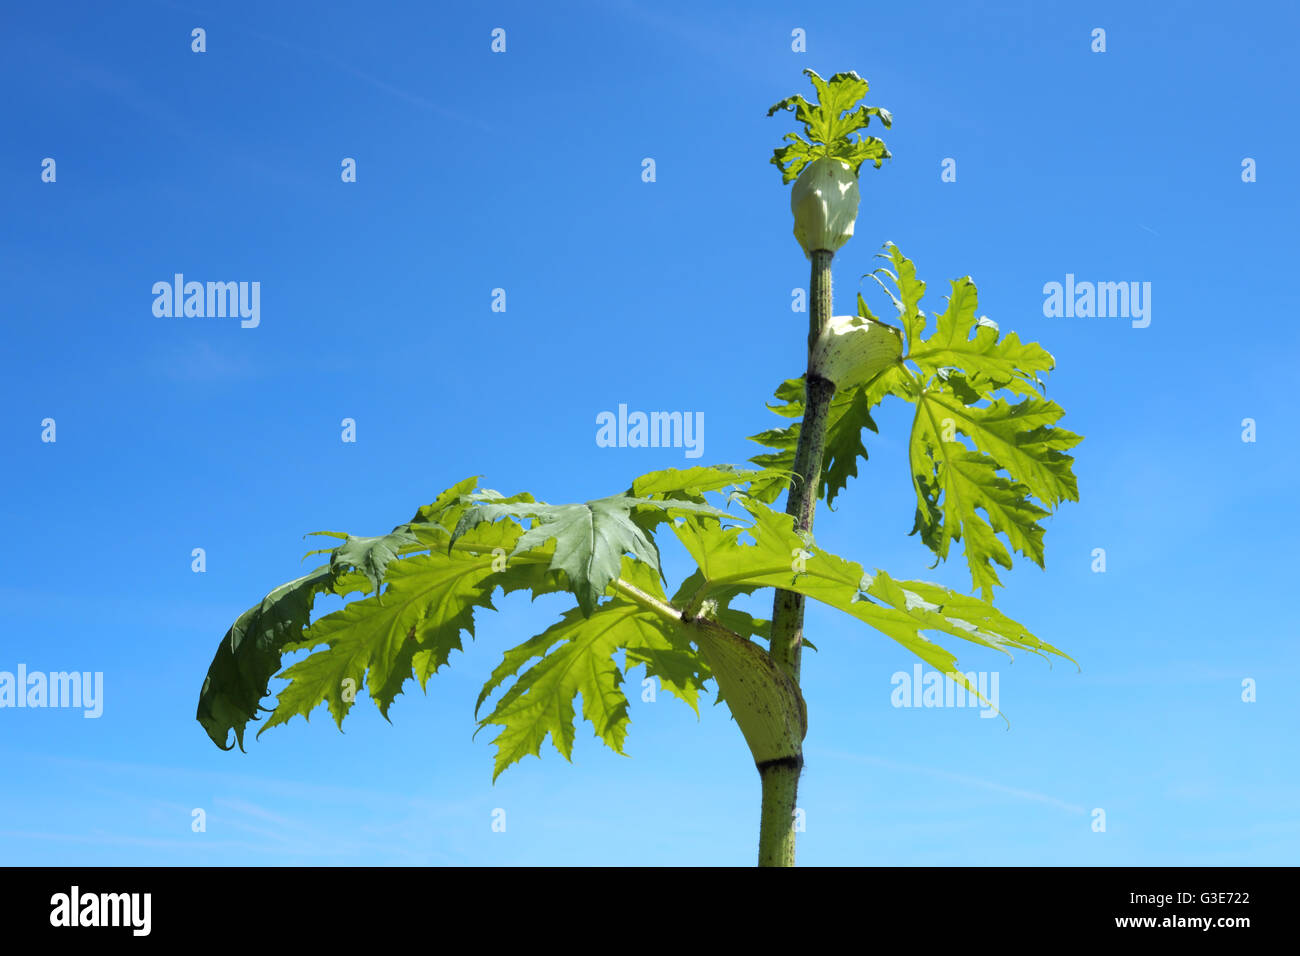 Heracleum mantegazzianum, commonly known as giant hogweed Stock Photo